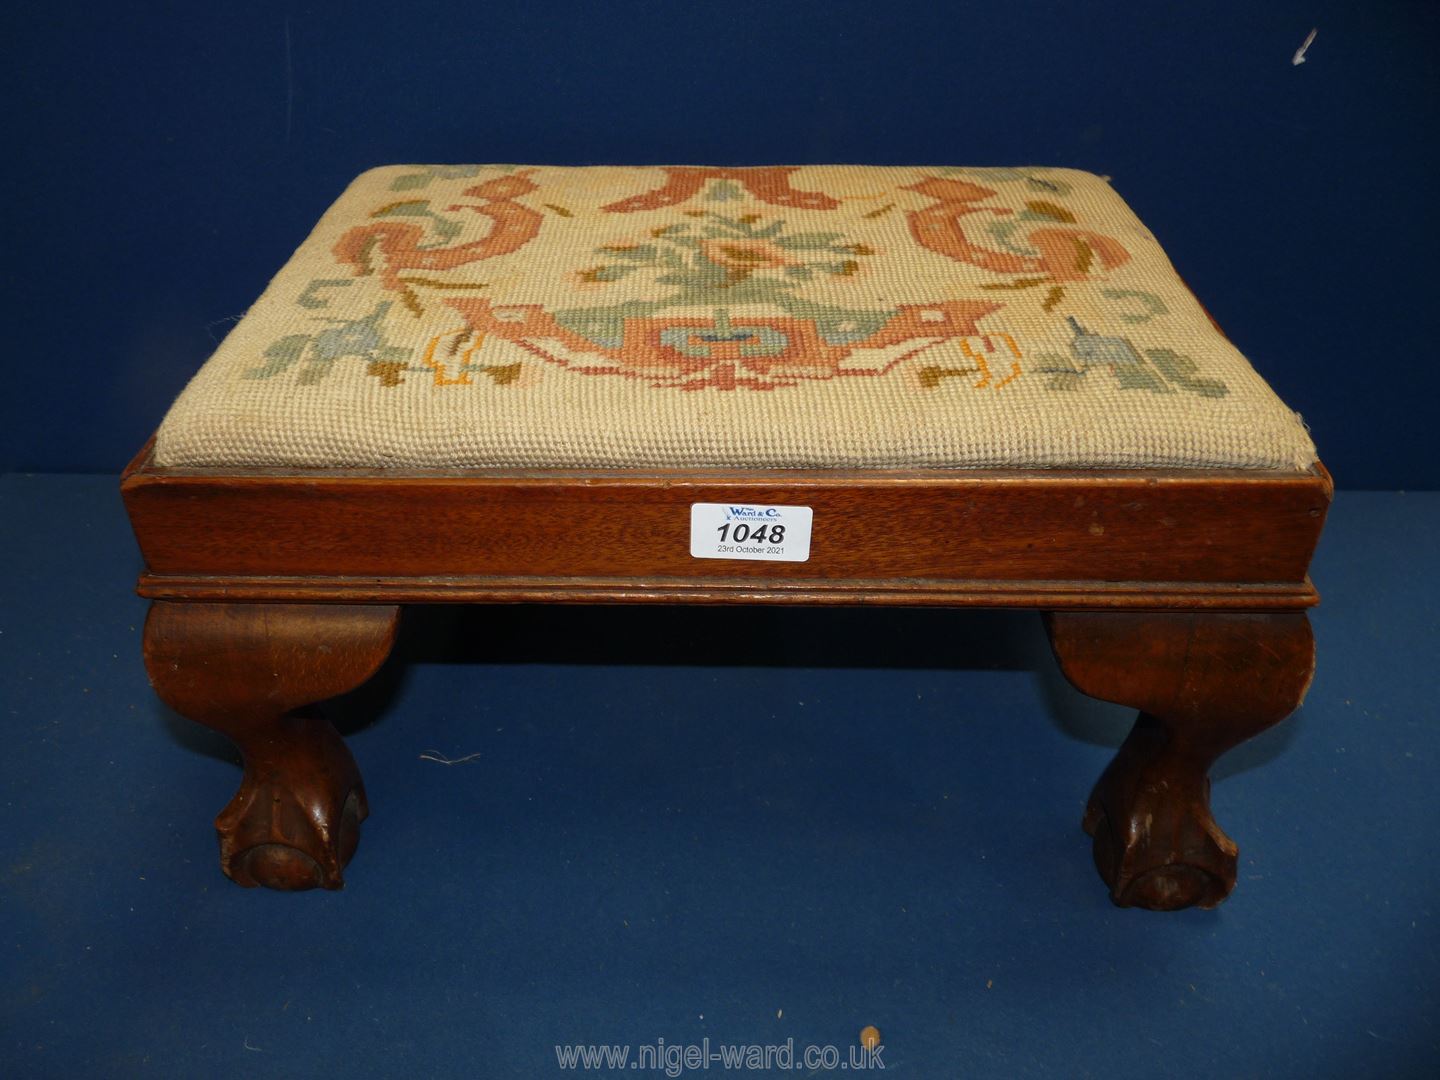 A tapestry topped Footstool with ball and claw feet, some wear, 10'' x 11'' x 8 1/4''.